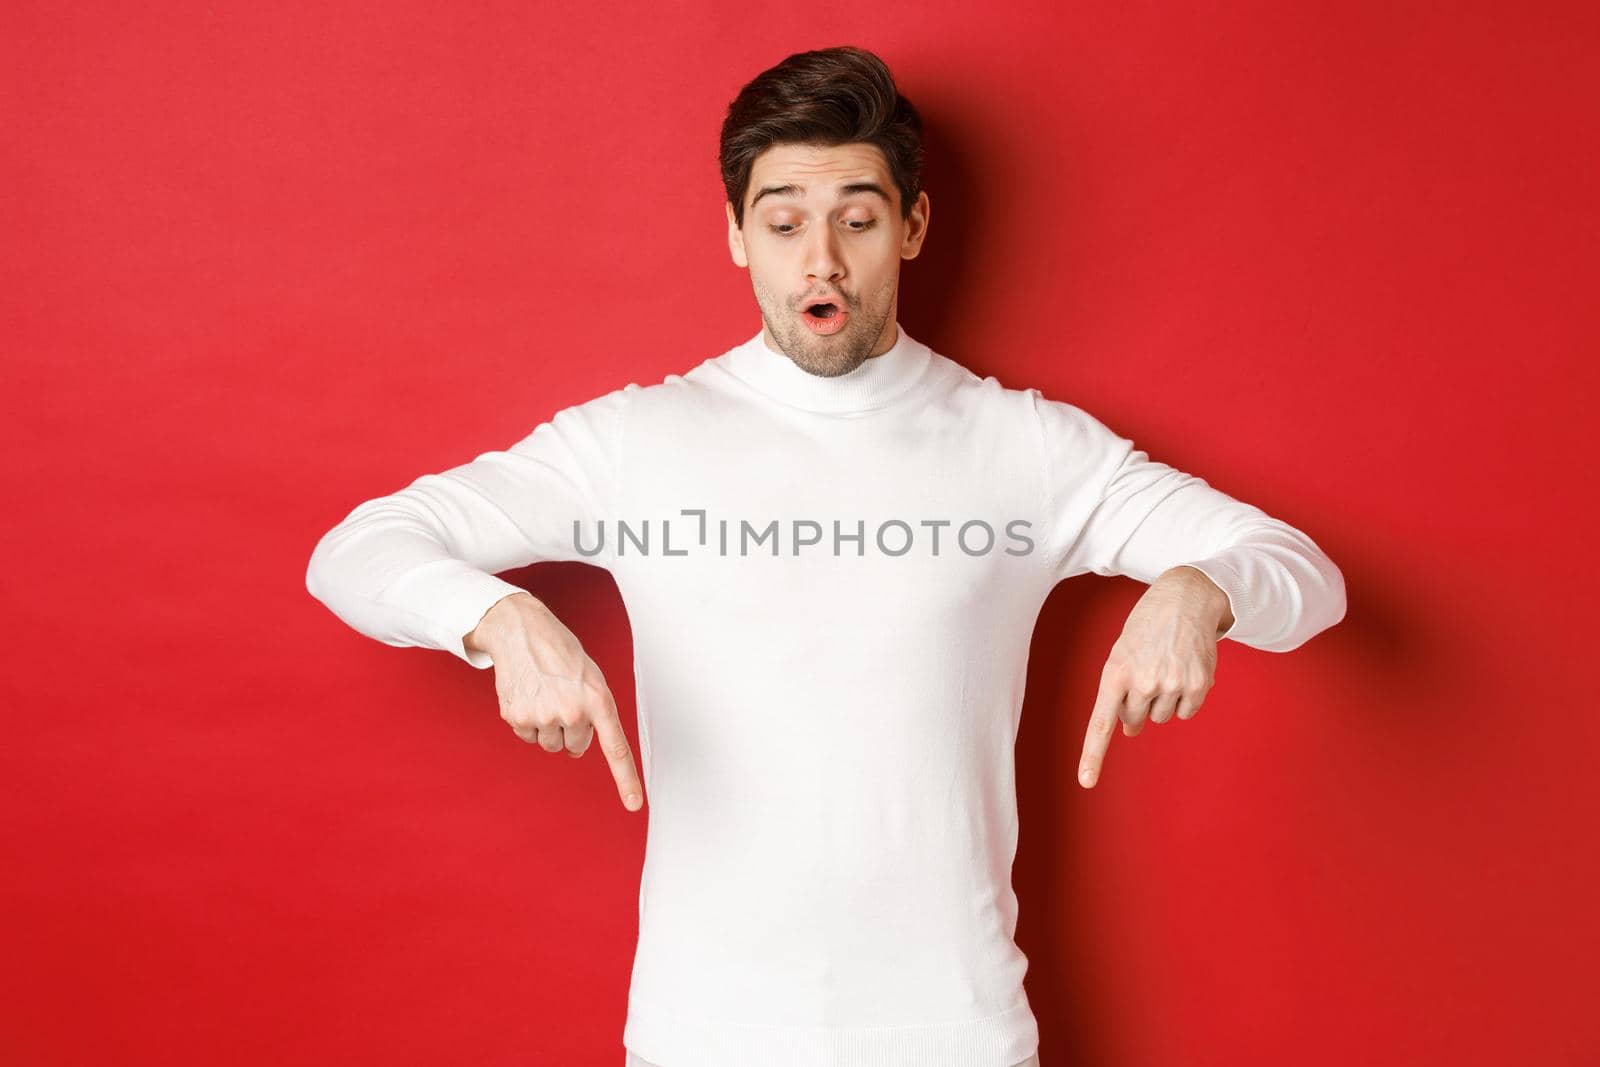 Portrait of surprised good-looking guy in white sweater, looking and pointing fingers down at logo, standing against red background.